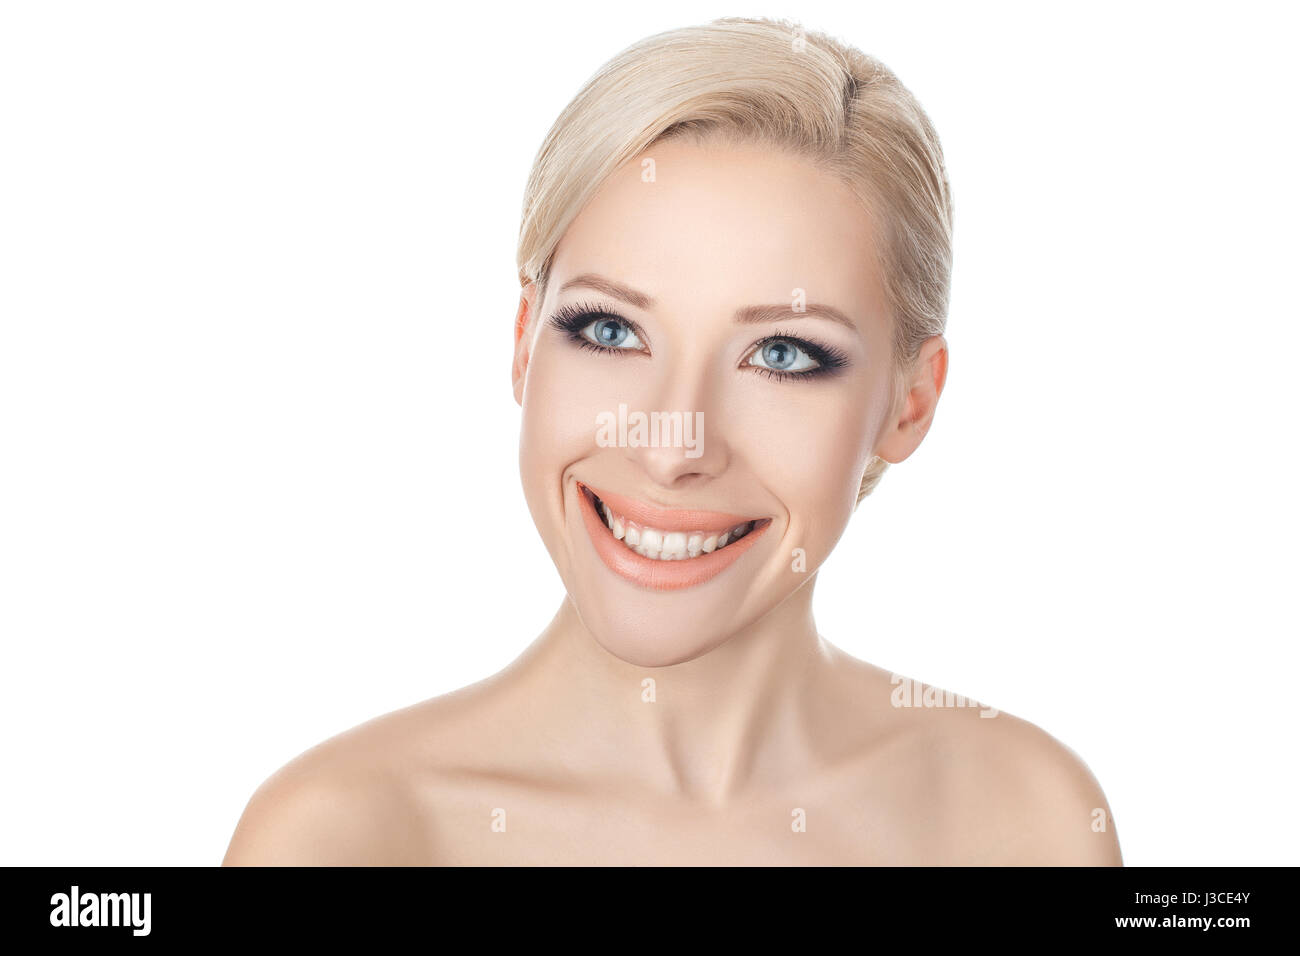 Close-up portraits blonde girl smiling broadly and beautiful eyes. Stock Photo